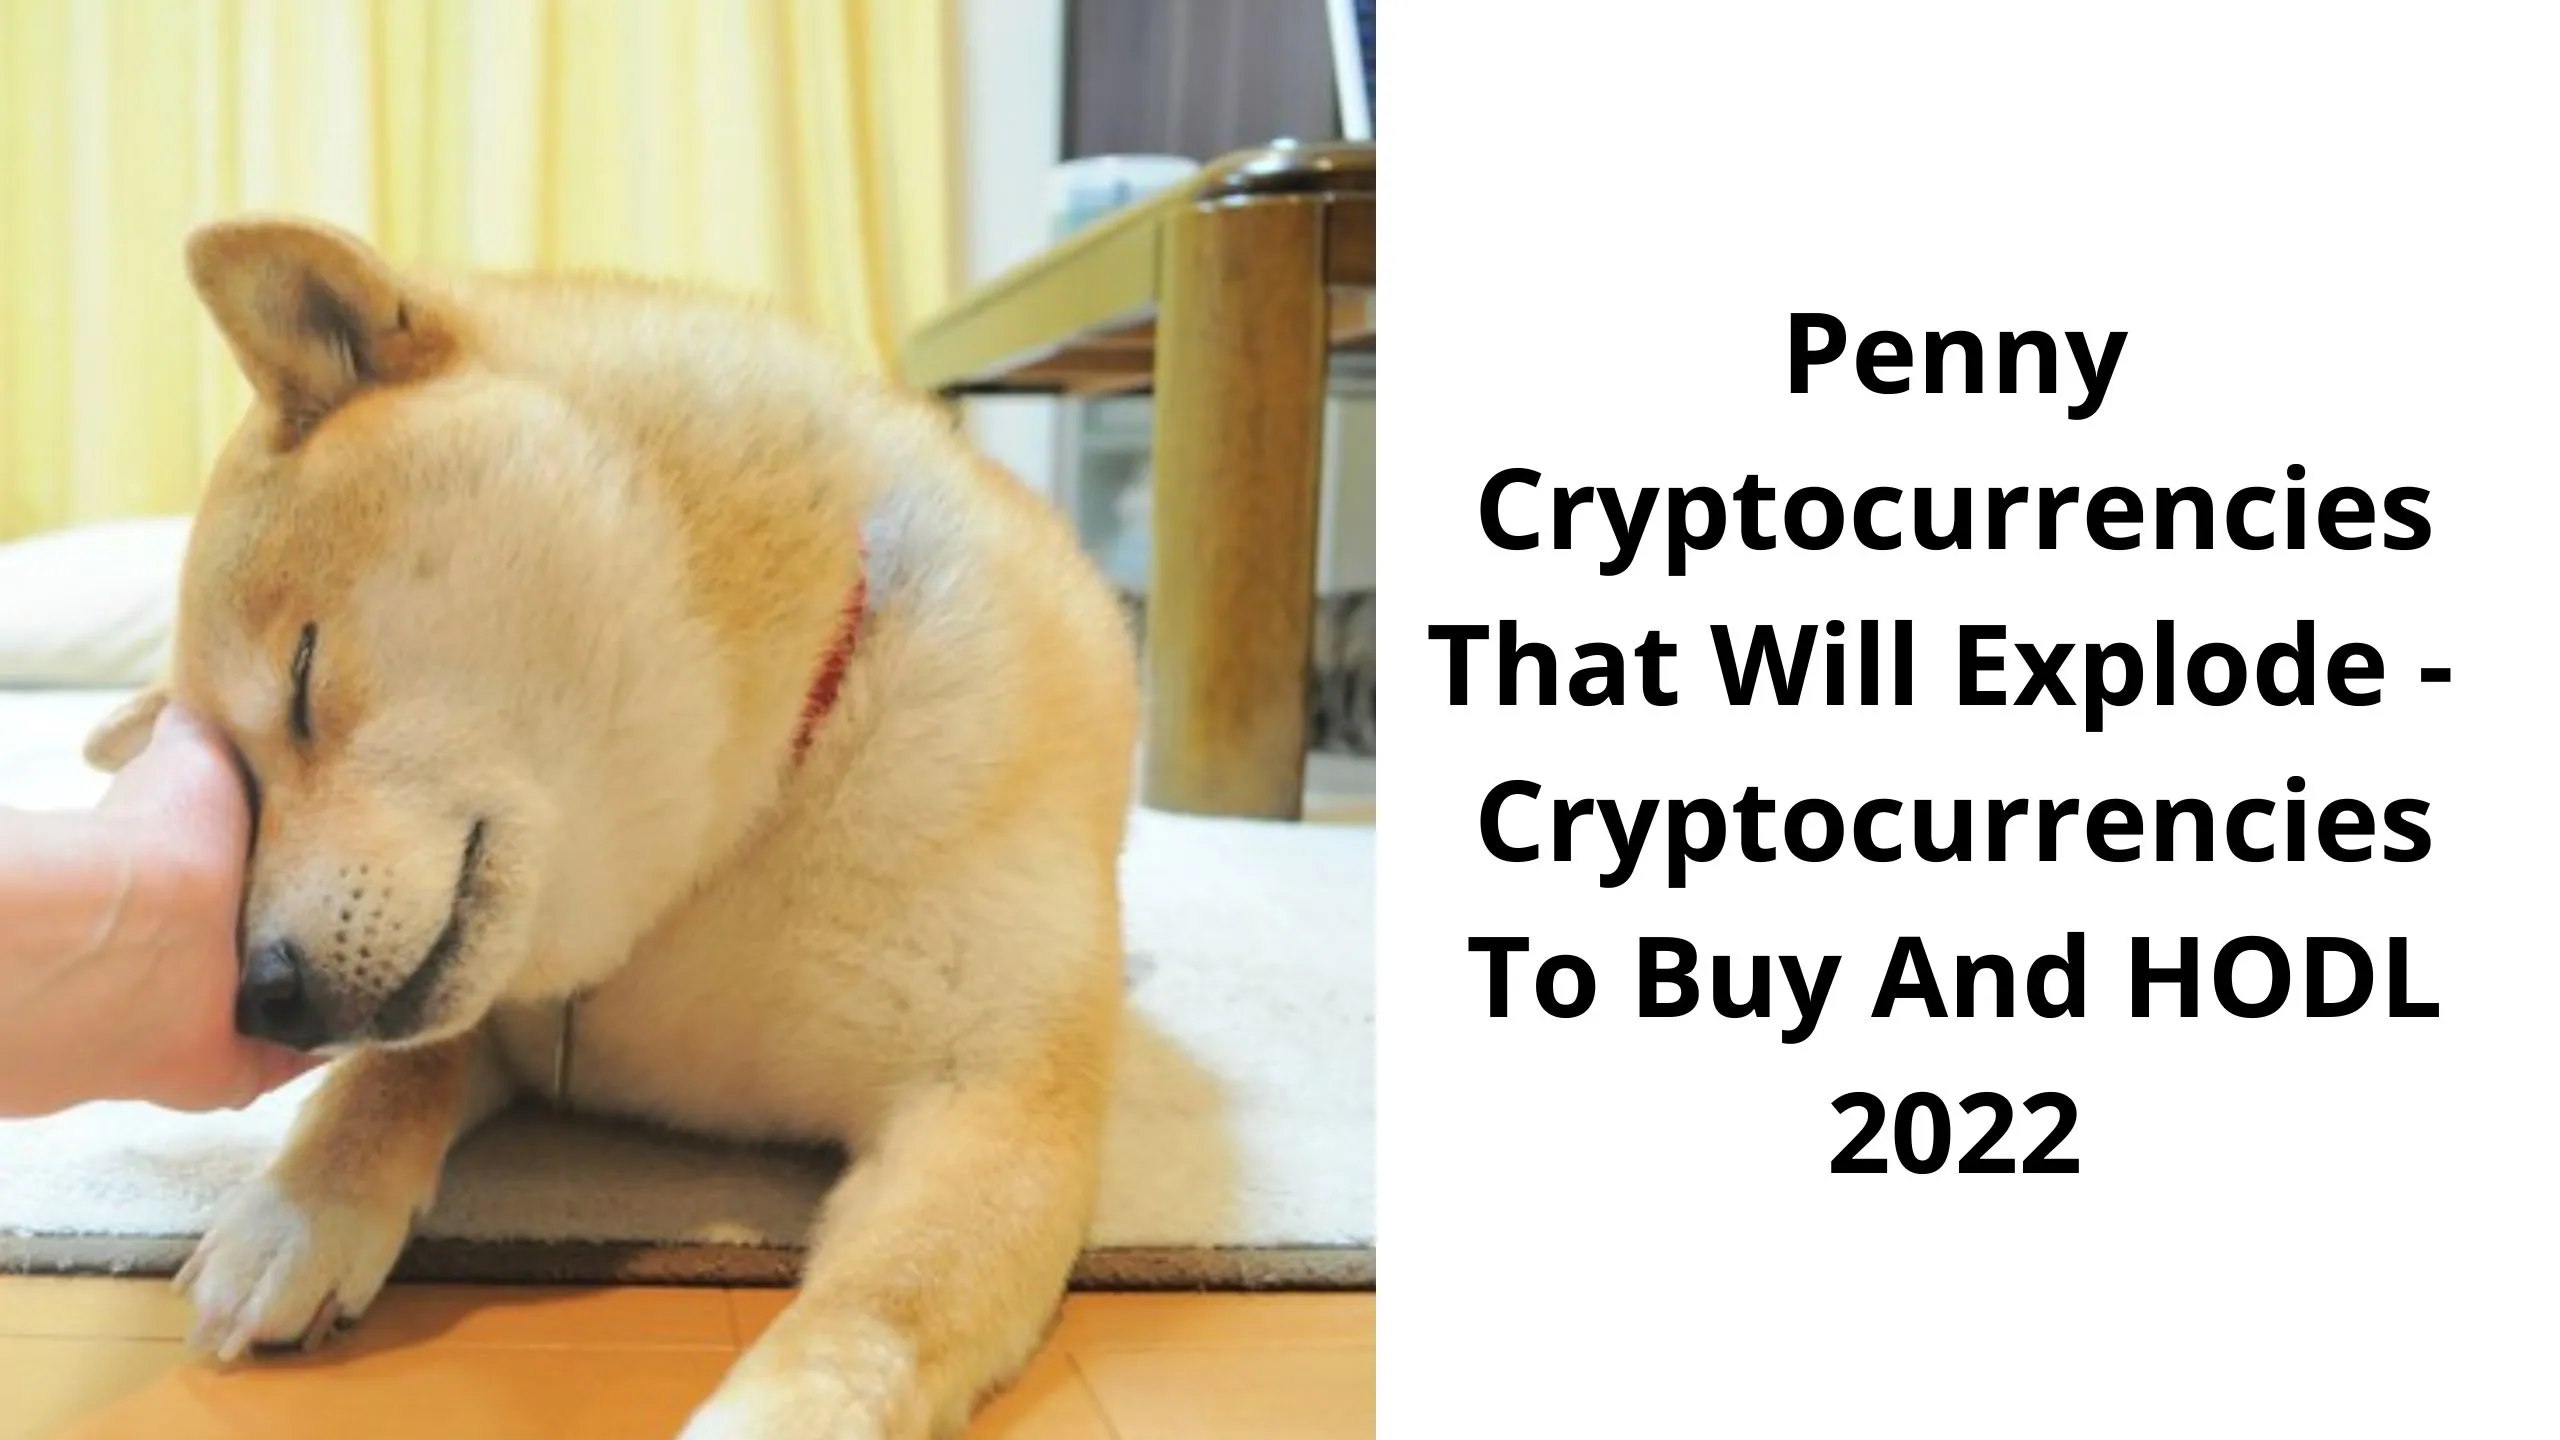 Penny Cryptocurrencies That Will Explode - Cryptocurrencies To Buy And HODL 2022